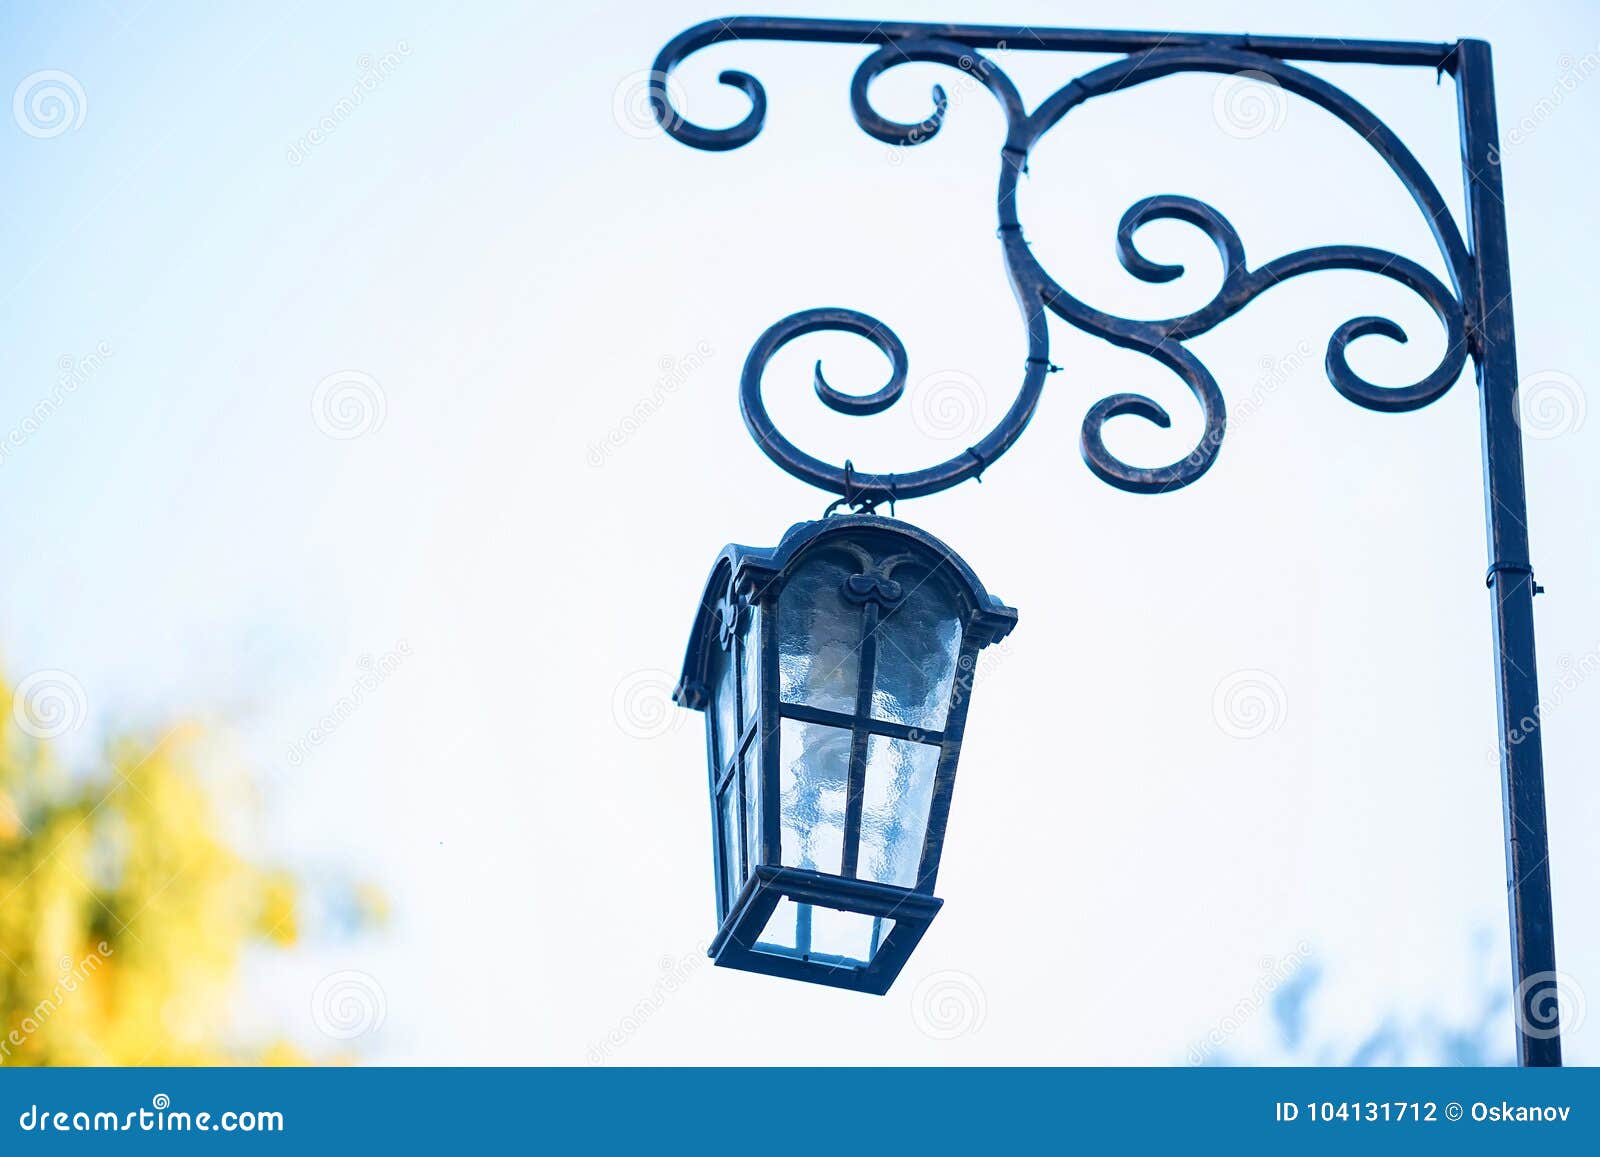 Decorative old street lamp stock image. Image of outdoor - 33632425